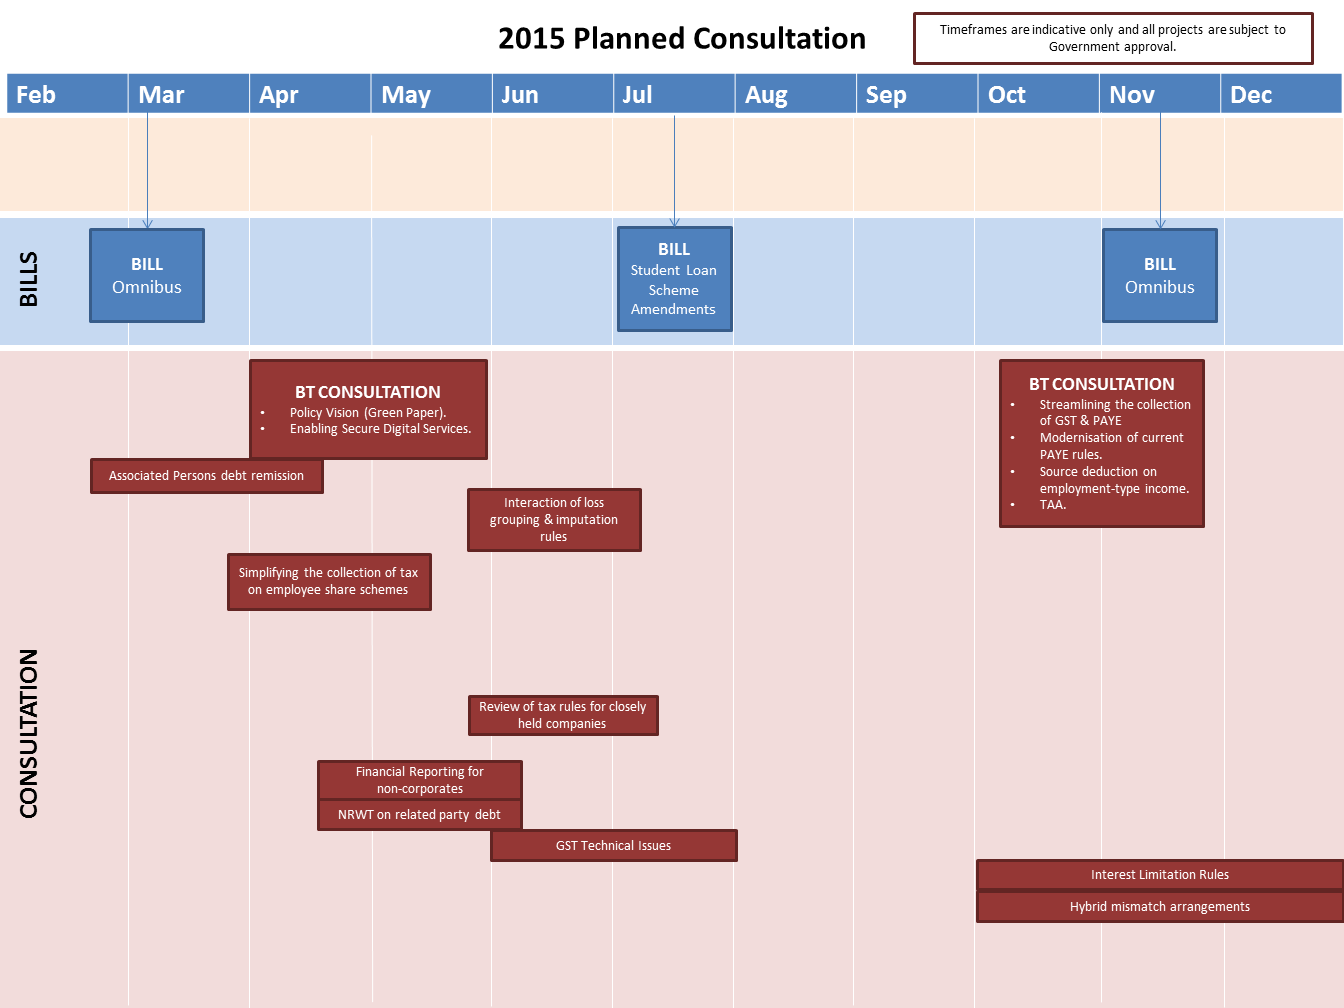 Timetable of planned consultation for 2015